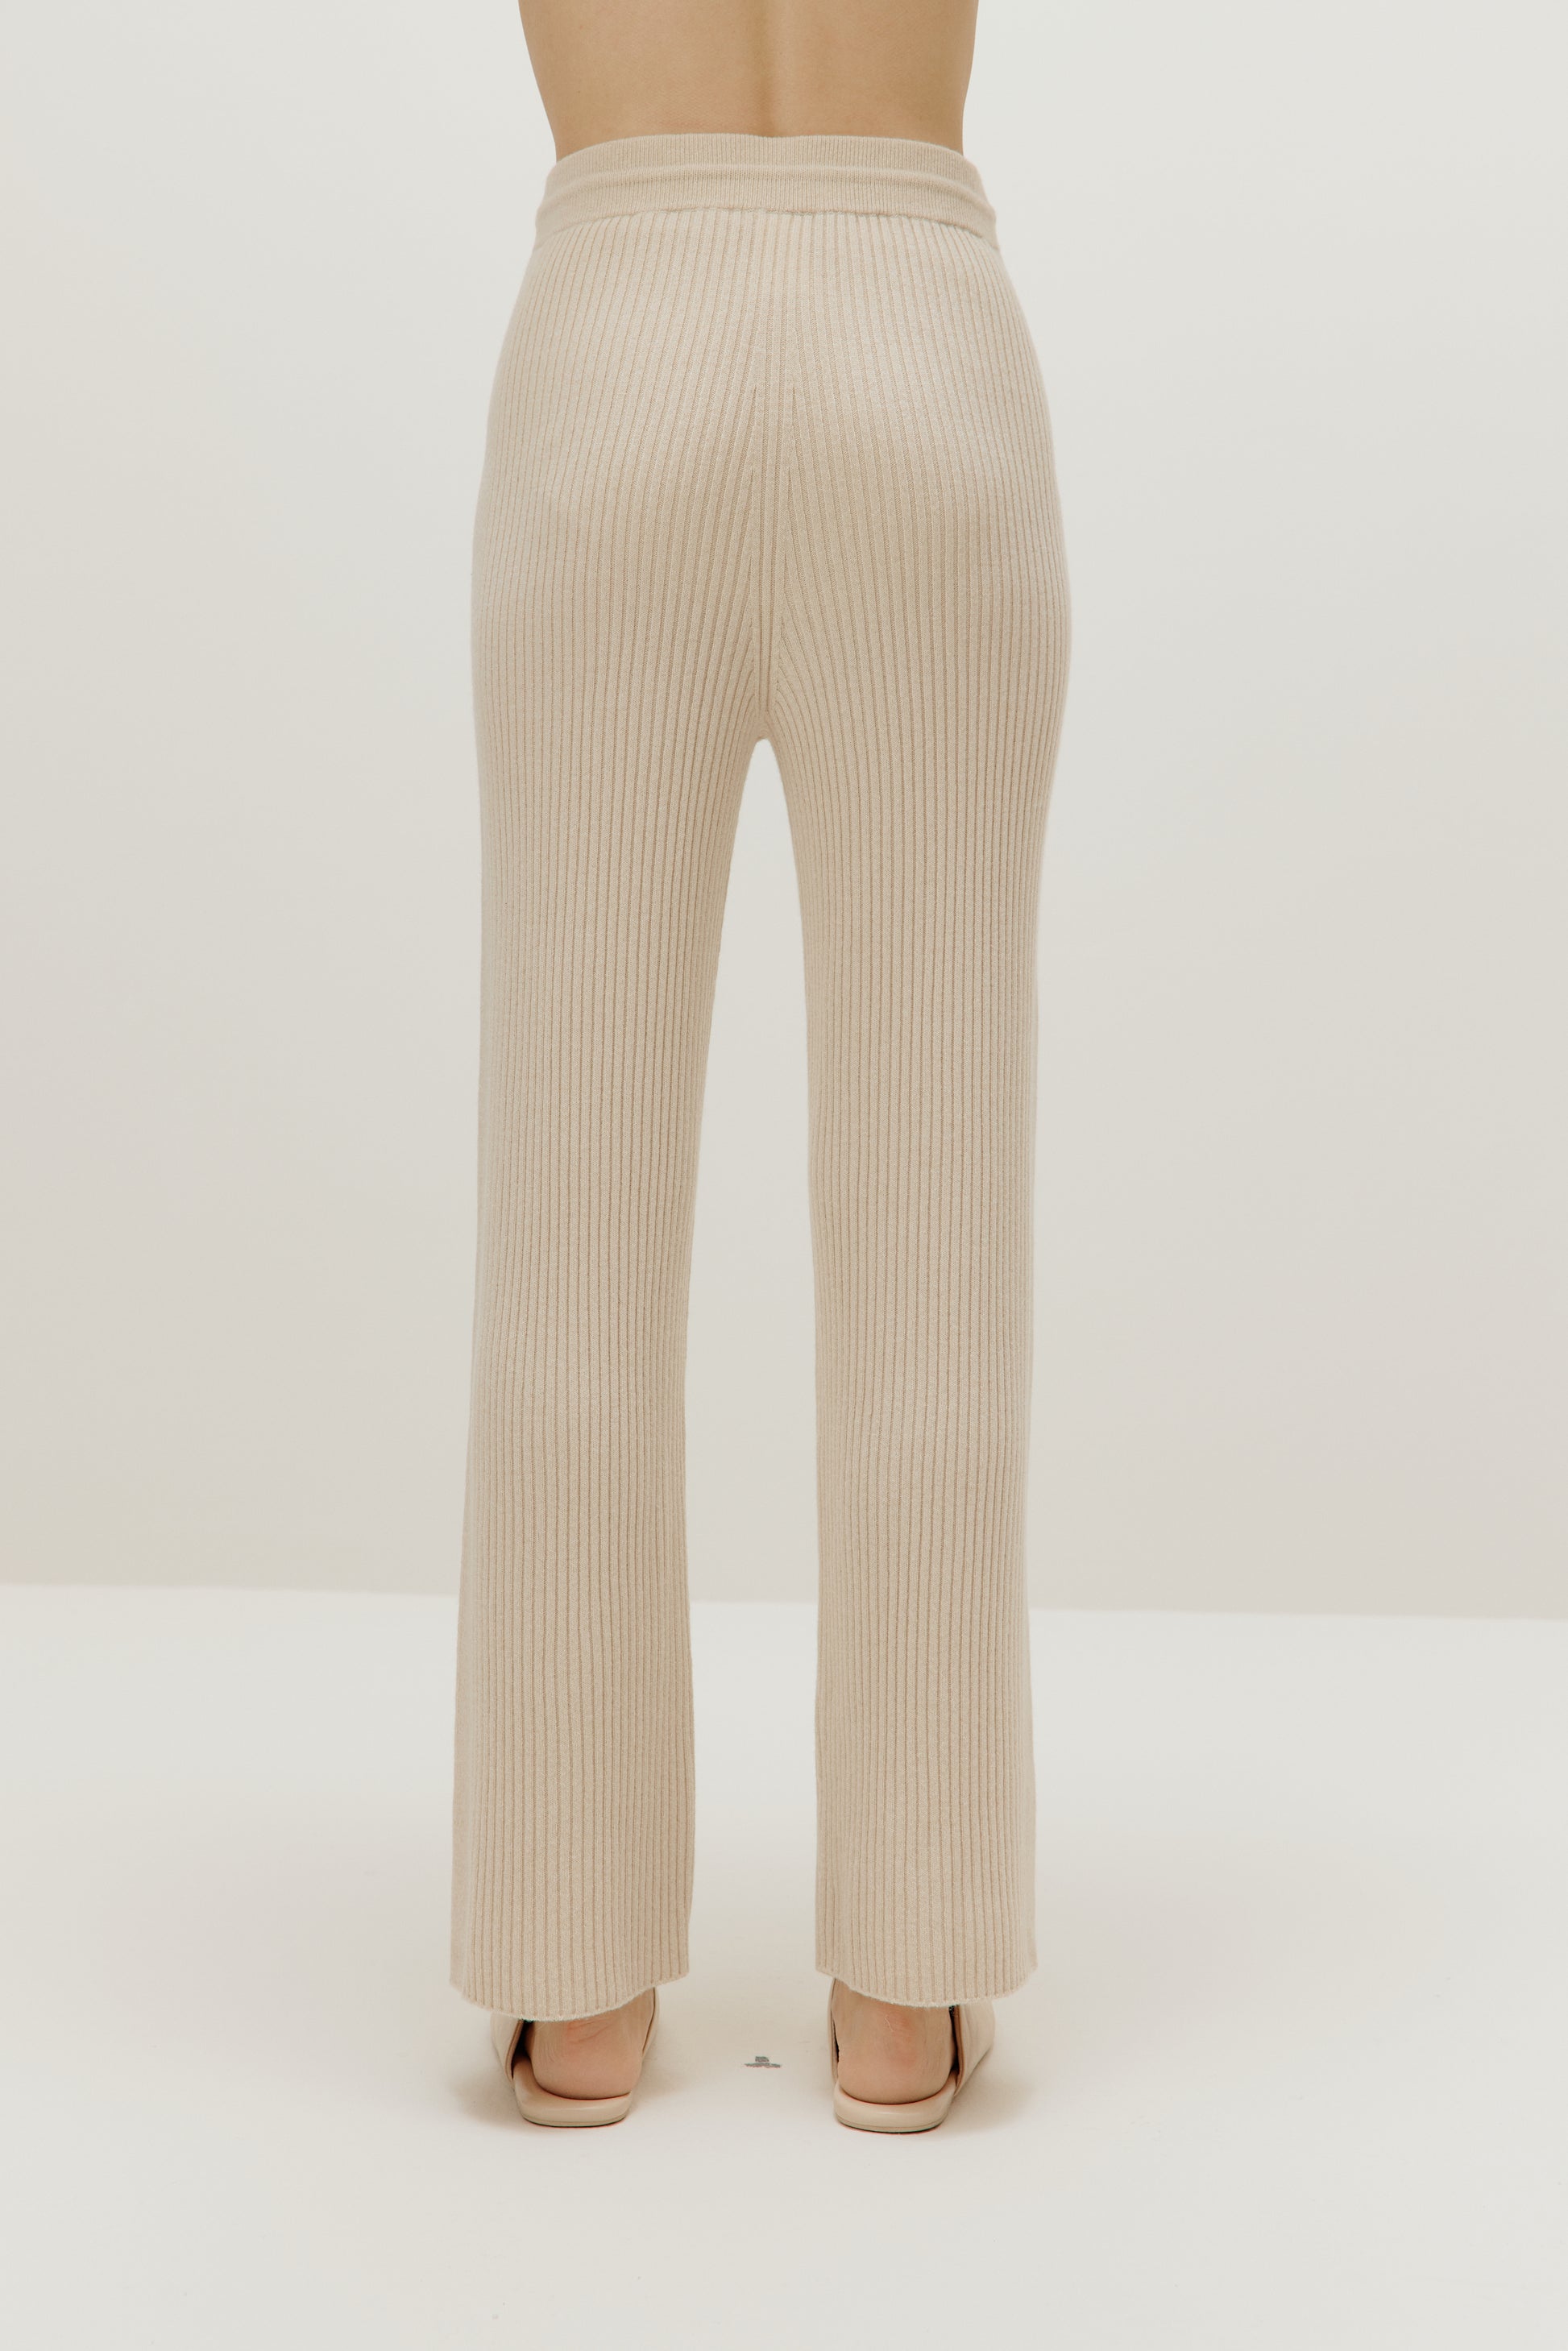 Alo Yoga Ribbed Cashmere High-Waist Flare Pants in Ivory